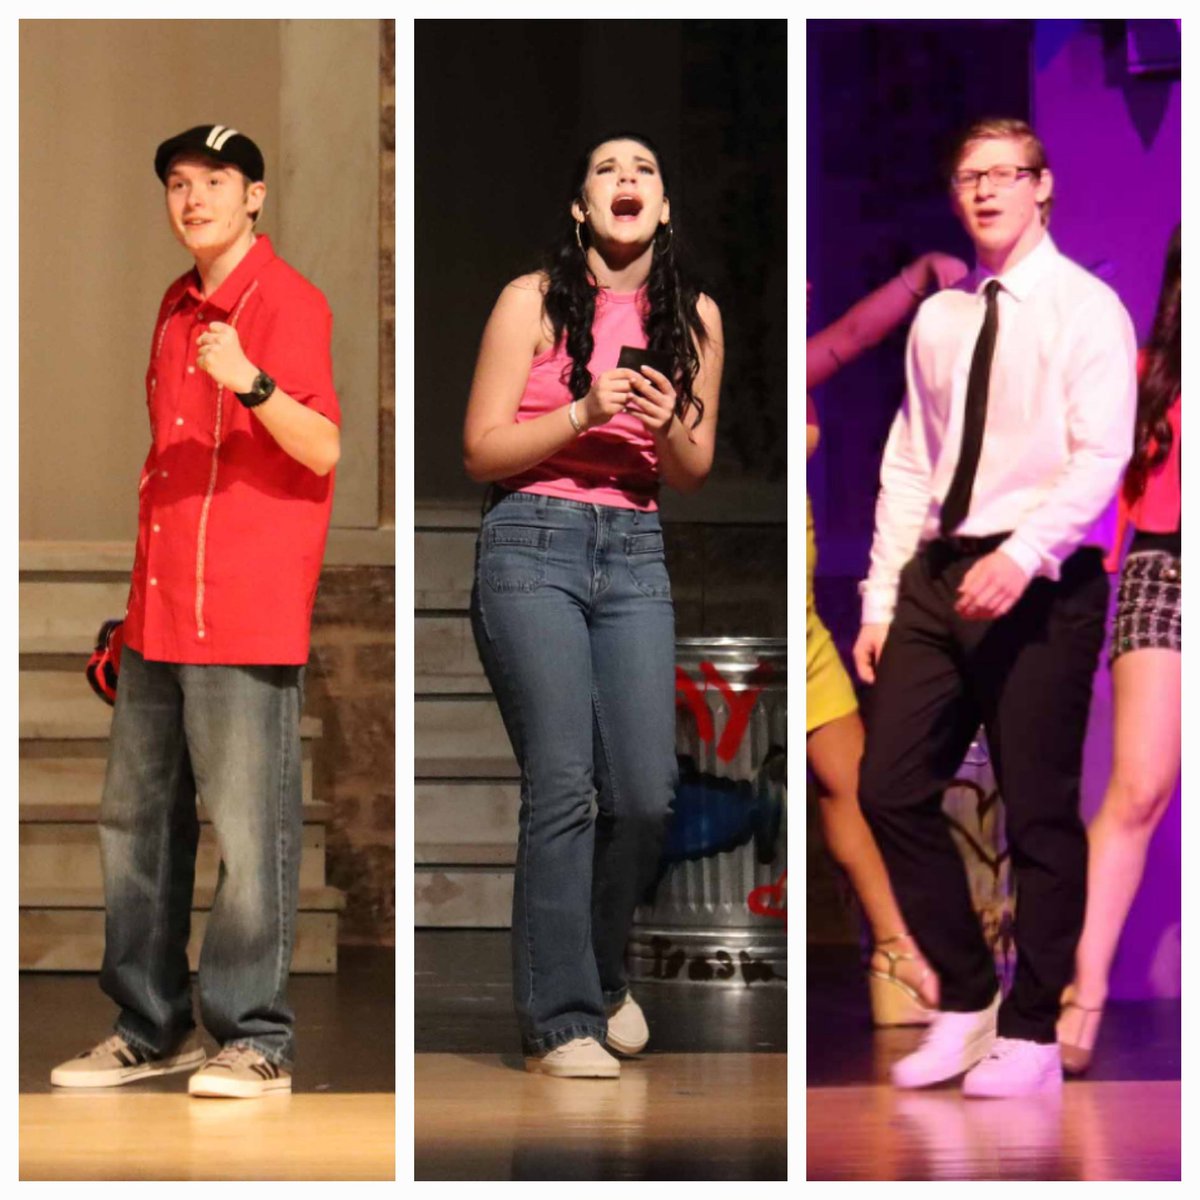 Montour was well represented at the Gene Kelly Awards last night!! Ava Stropkaj performed in the opening number due to having been selected as a Best Actress semi-finalist, and Charlie McMahon and Luke Rossetti performed in the closing number! Fantastic job! #MontourProud